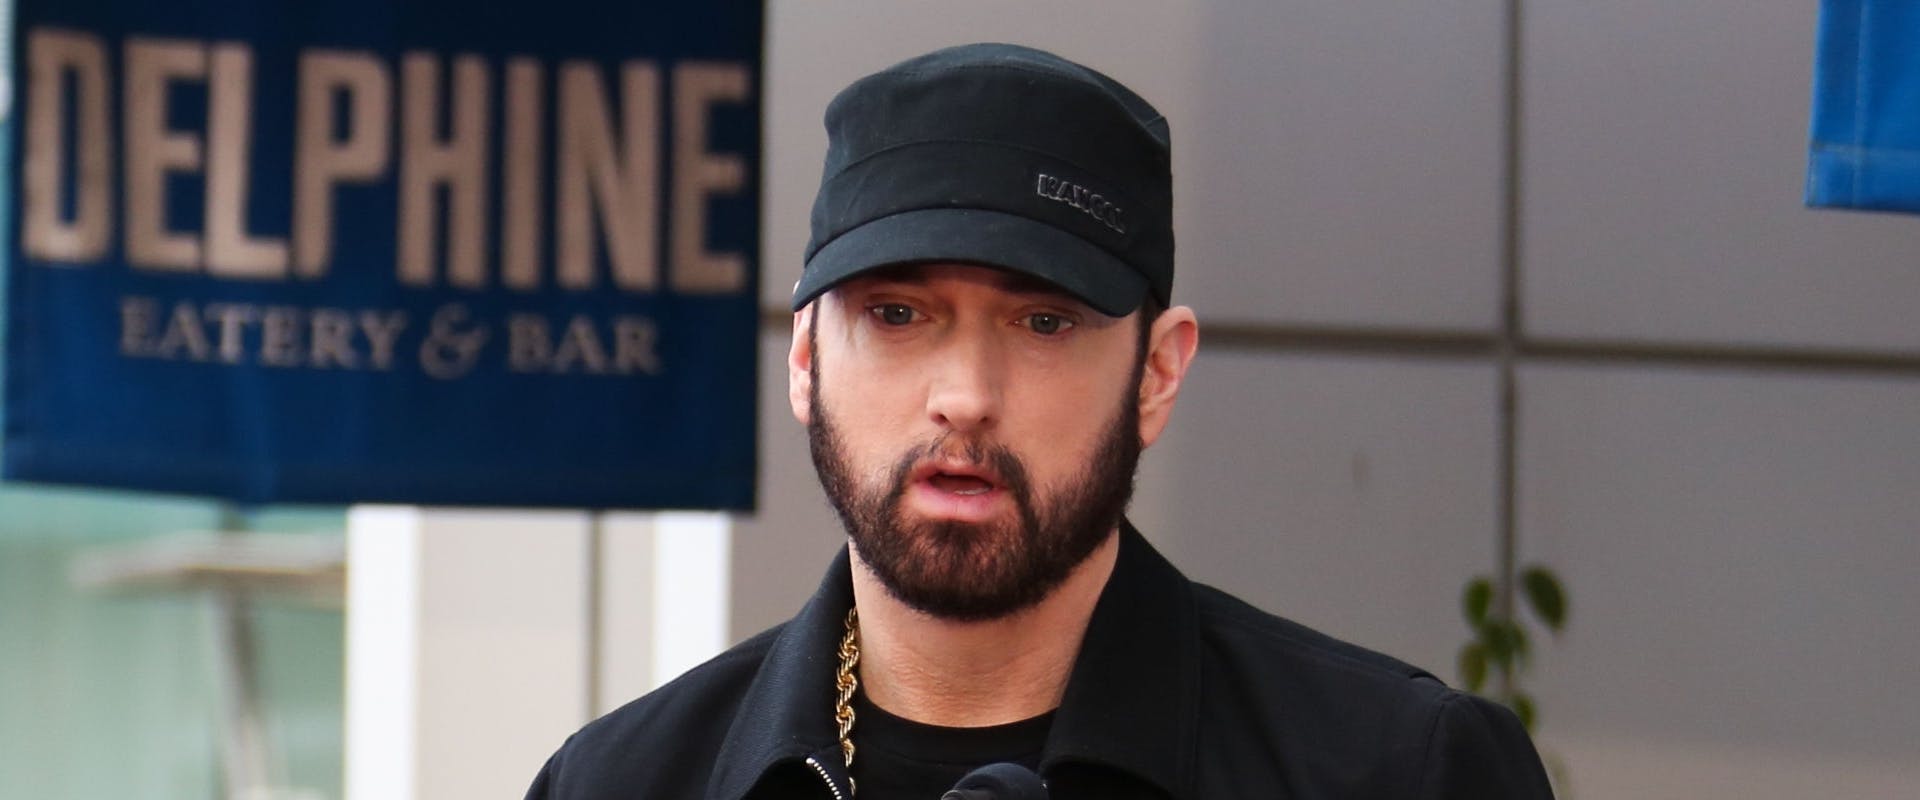 Eminem attends a ceremony honoring Curtis "50 Cent" Jackson with a star on the Hollywood Walk of Fame on January 30, 2020 in Hollywood, California. 